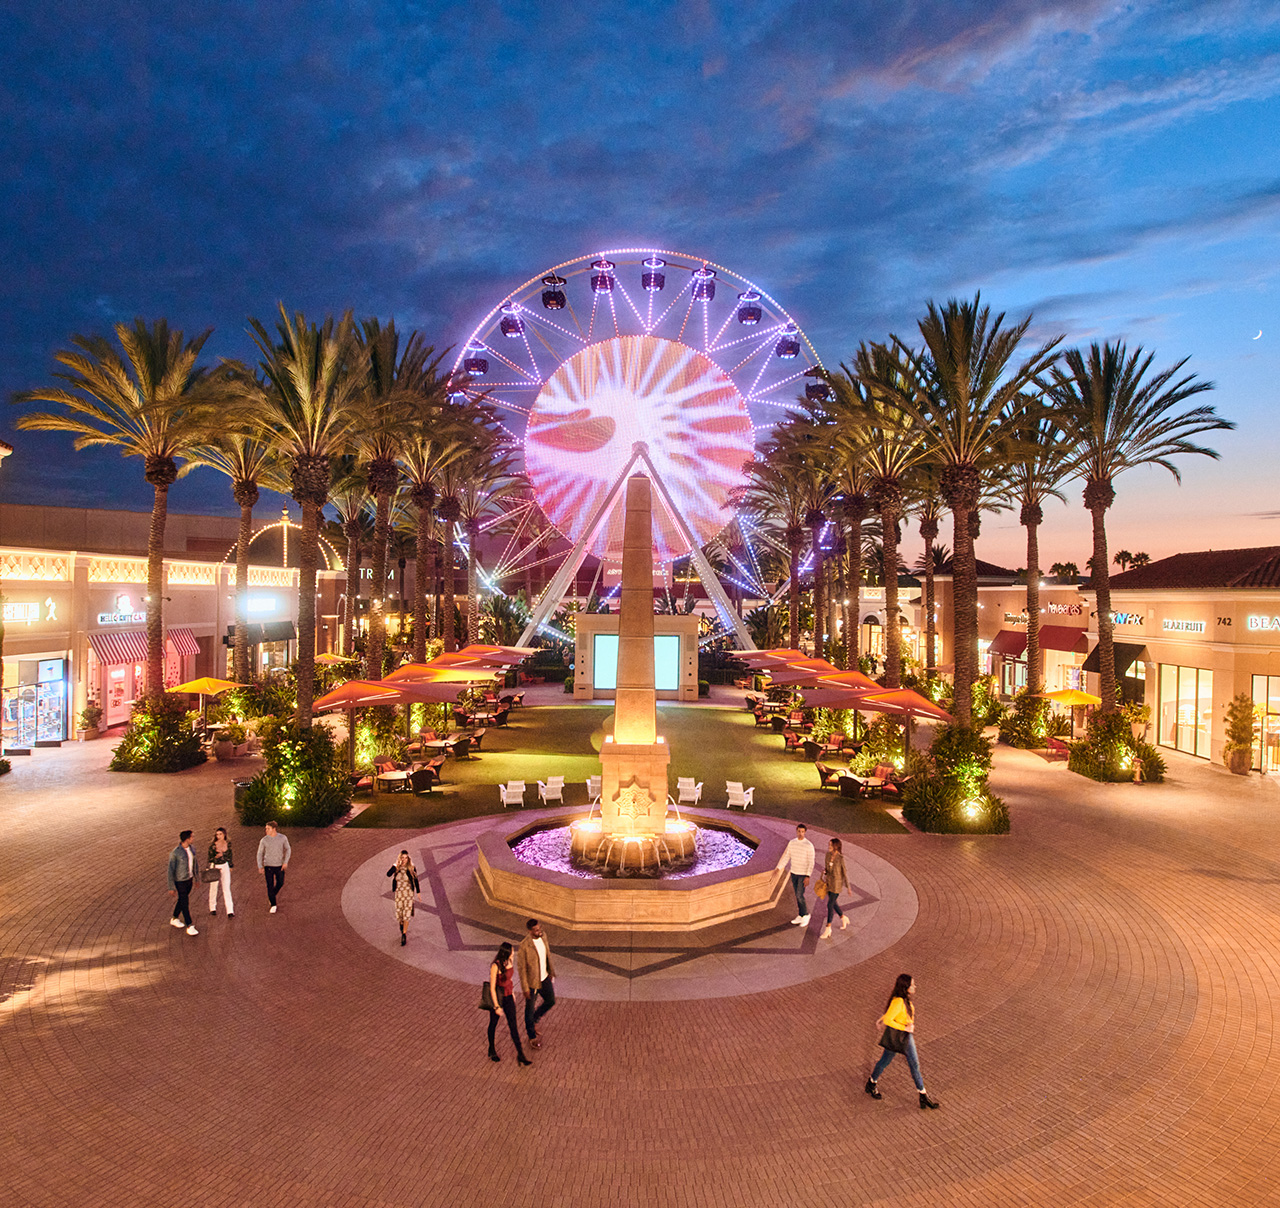 Movies on the Lawn at Irvine Spectrum Center Are Coming to a Close